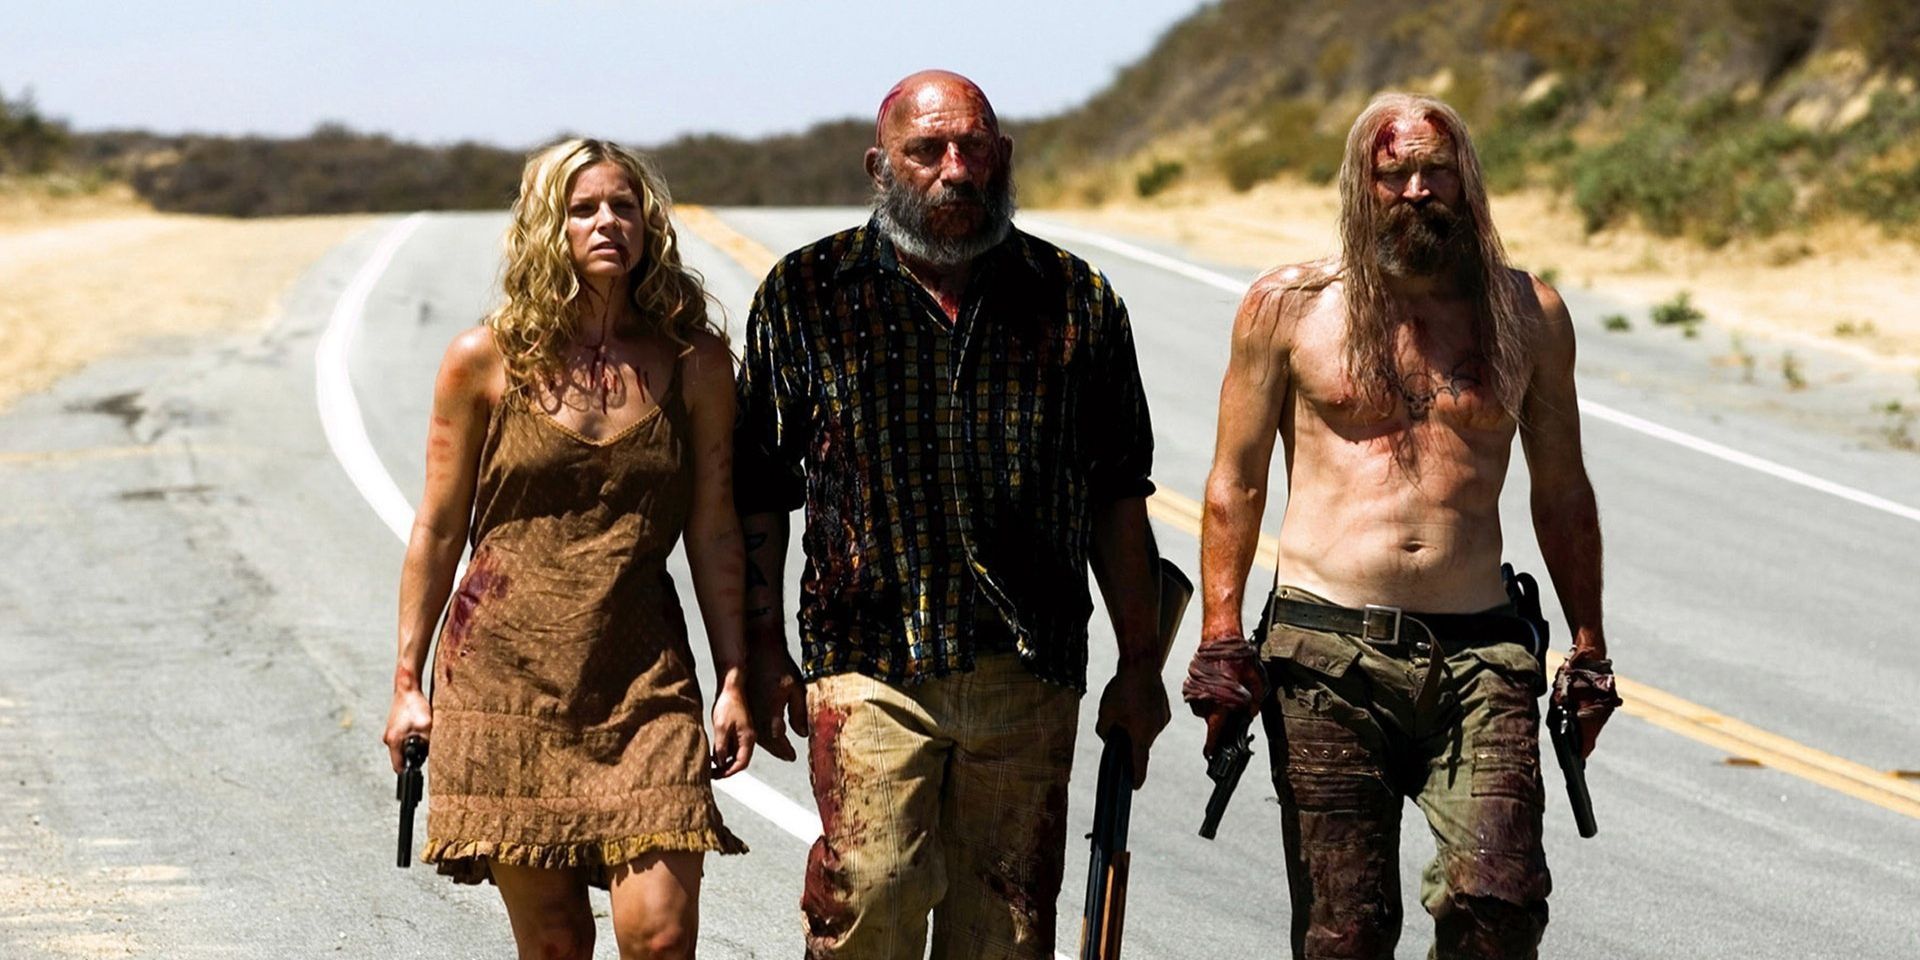 The Firefly family from Rob Zombies' The Devil's Rejects.